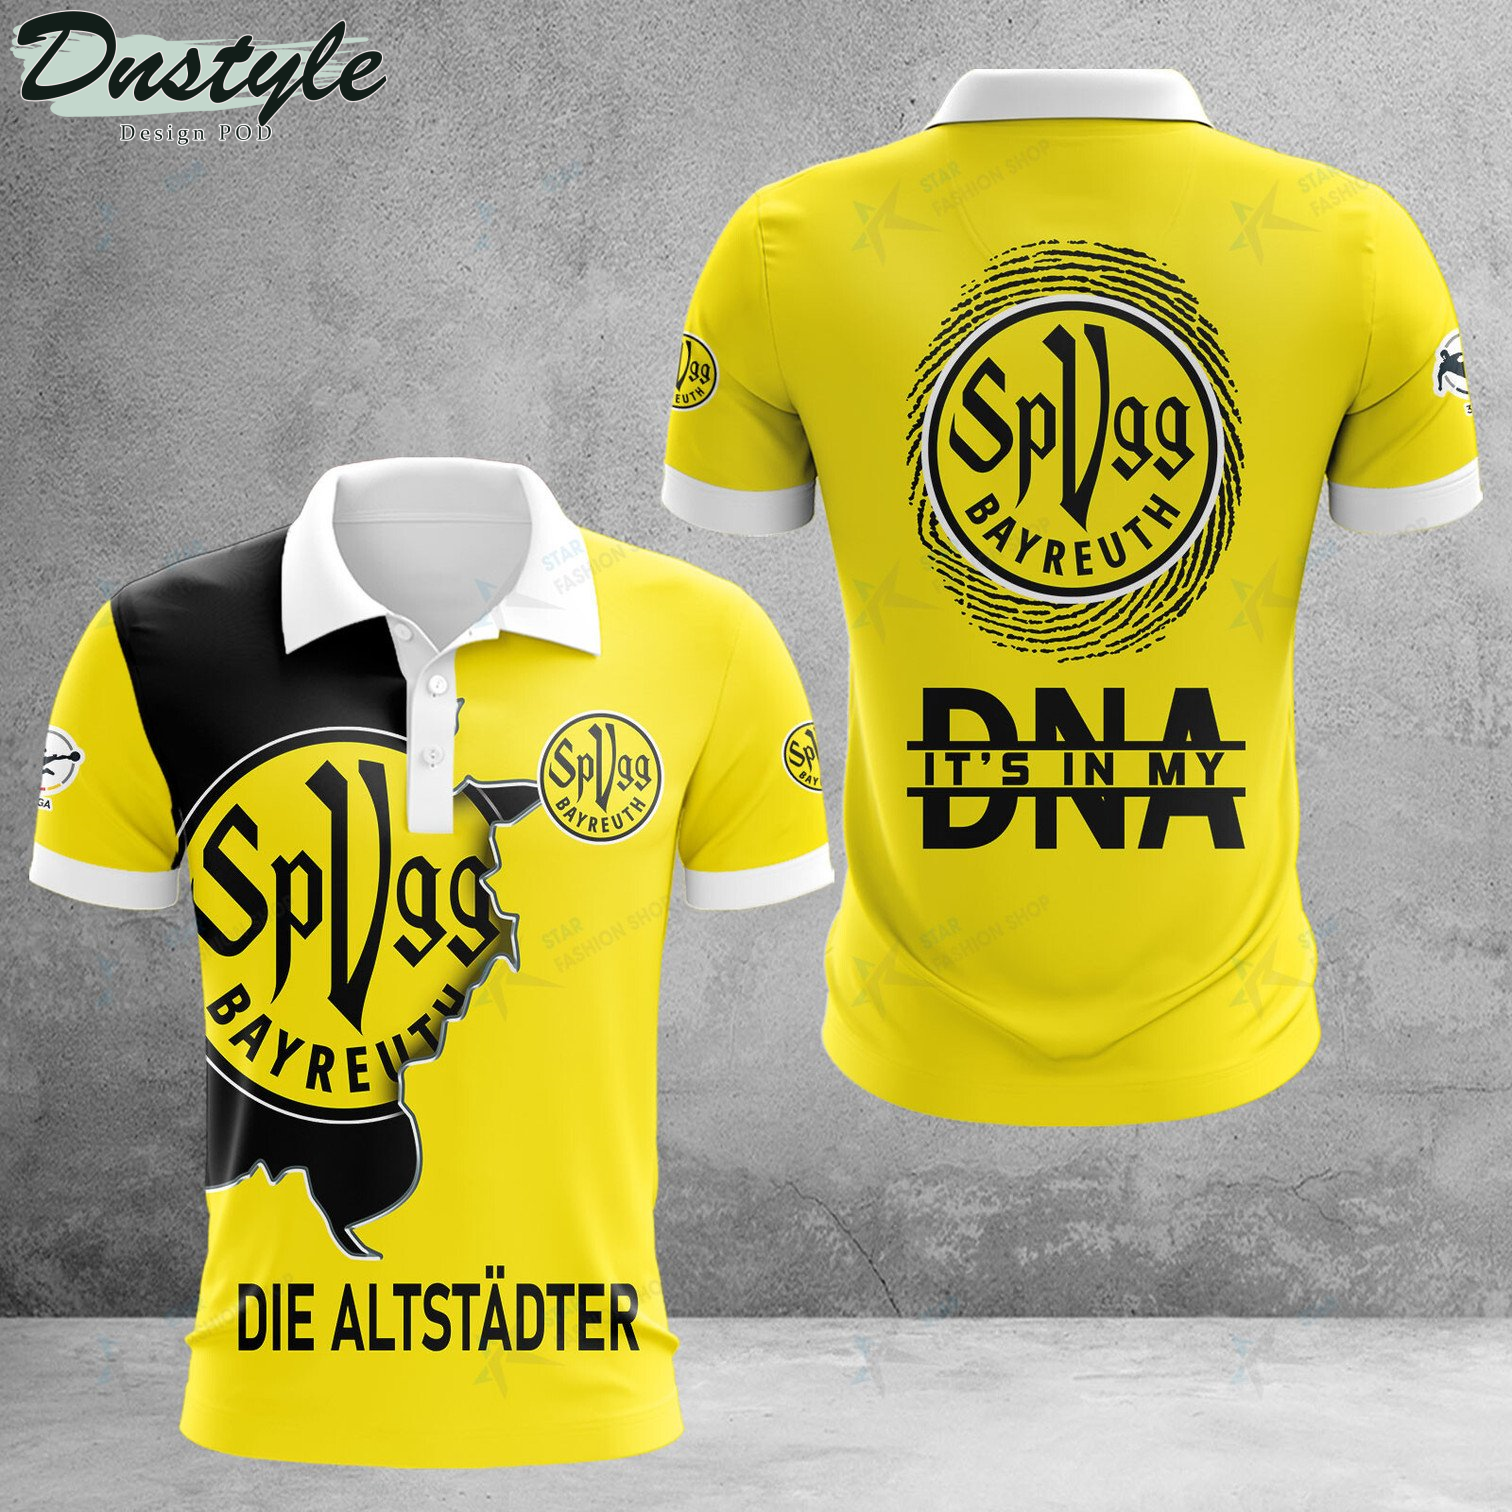 SpVgg Bayreuth 1921 e.V. it's in my DNA polo shirt